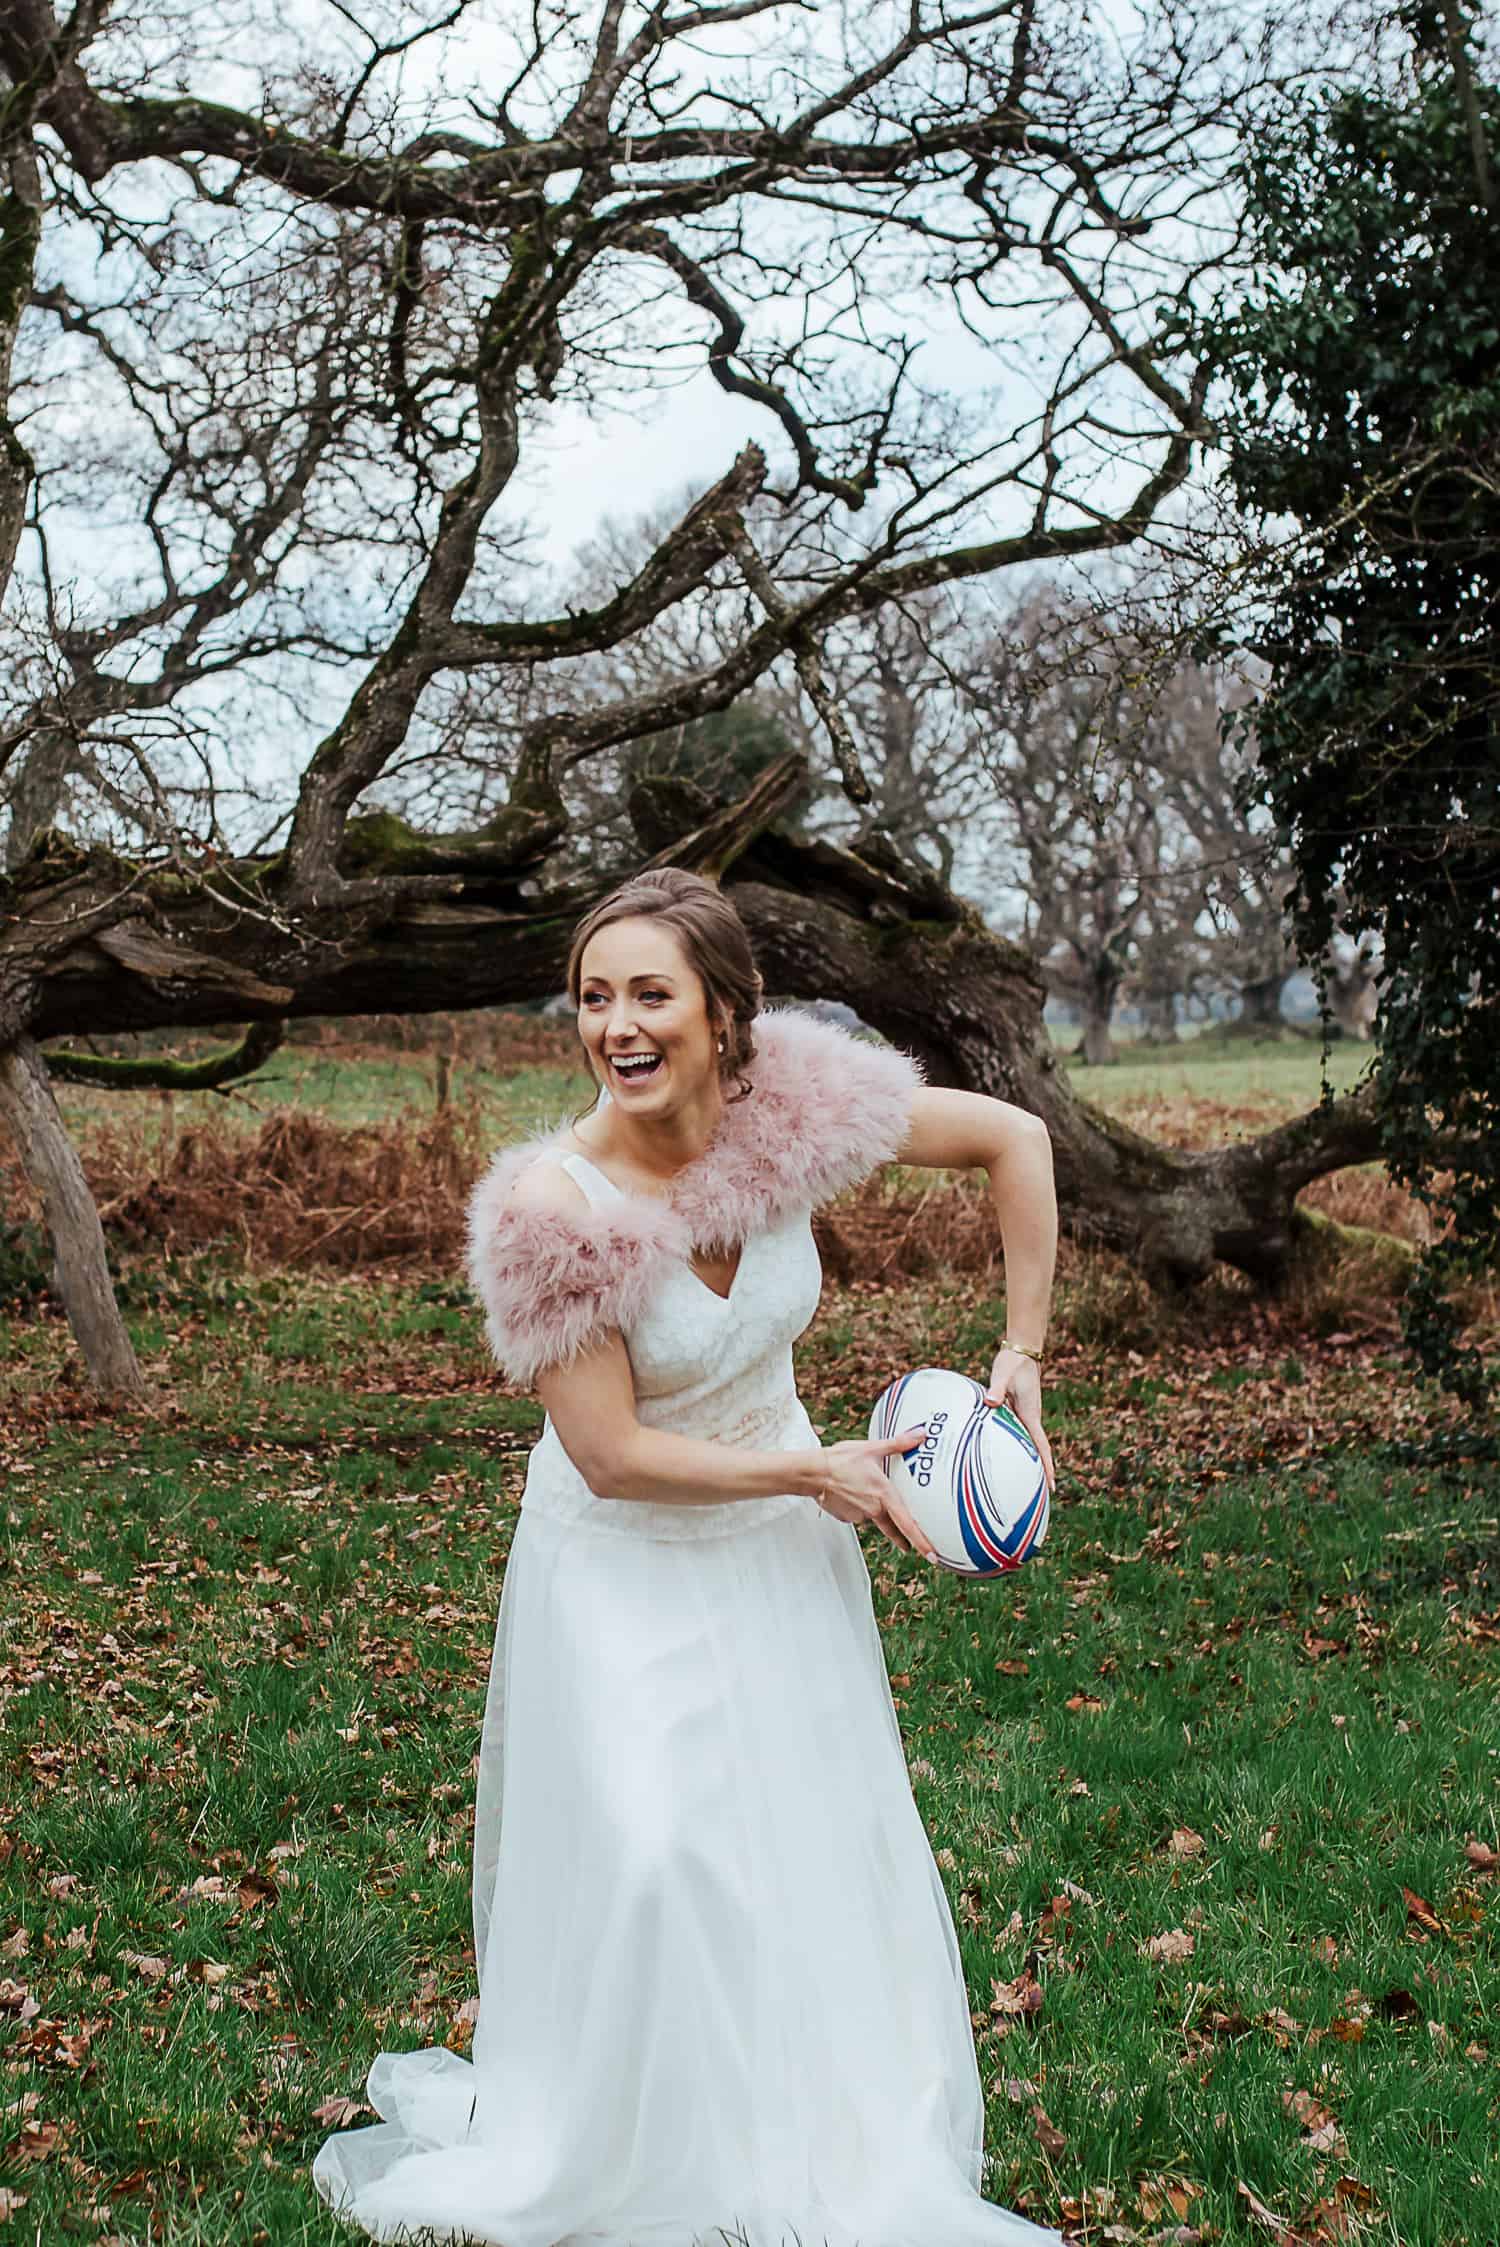 bride and groom playing rugby documentary wedding photographer ireland